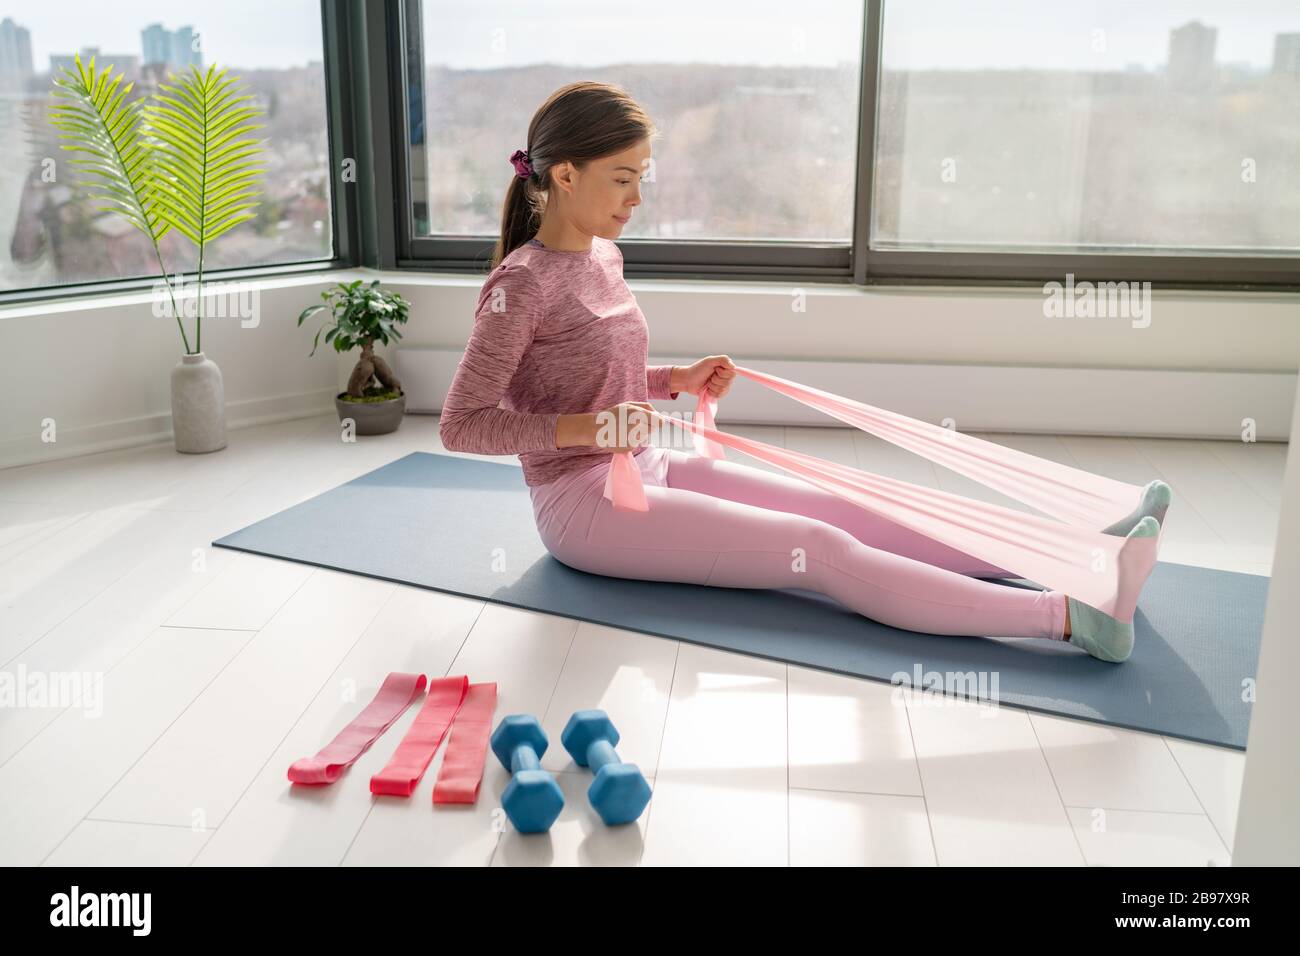 Home workout with resistance band fitness Asian woman training back muscles  with rowing arm movement using rubber bands on yoga mat floor exercises  Stock Photo - Alamy